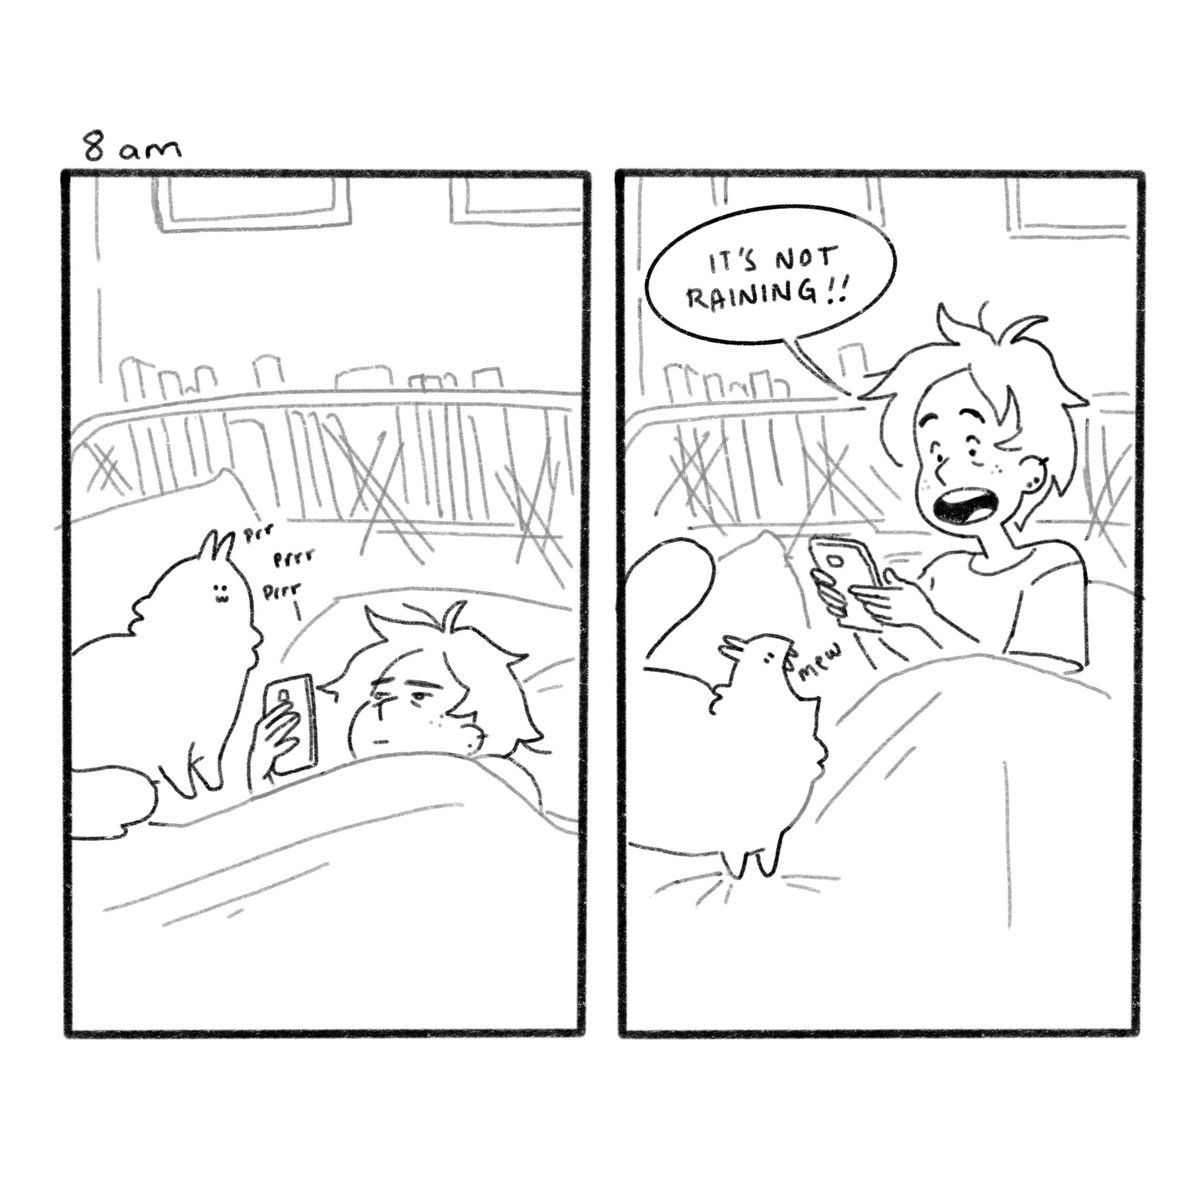 Hourlies thread! A Vancouver miracle 